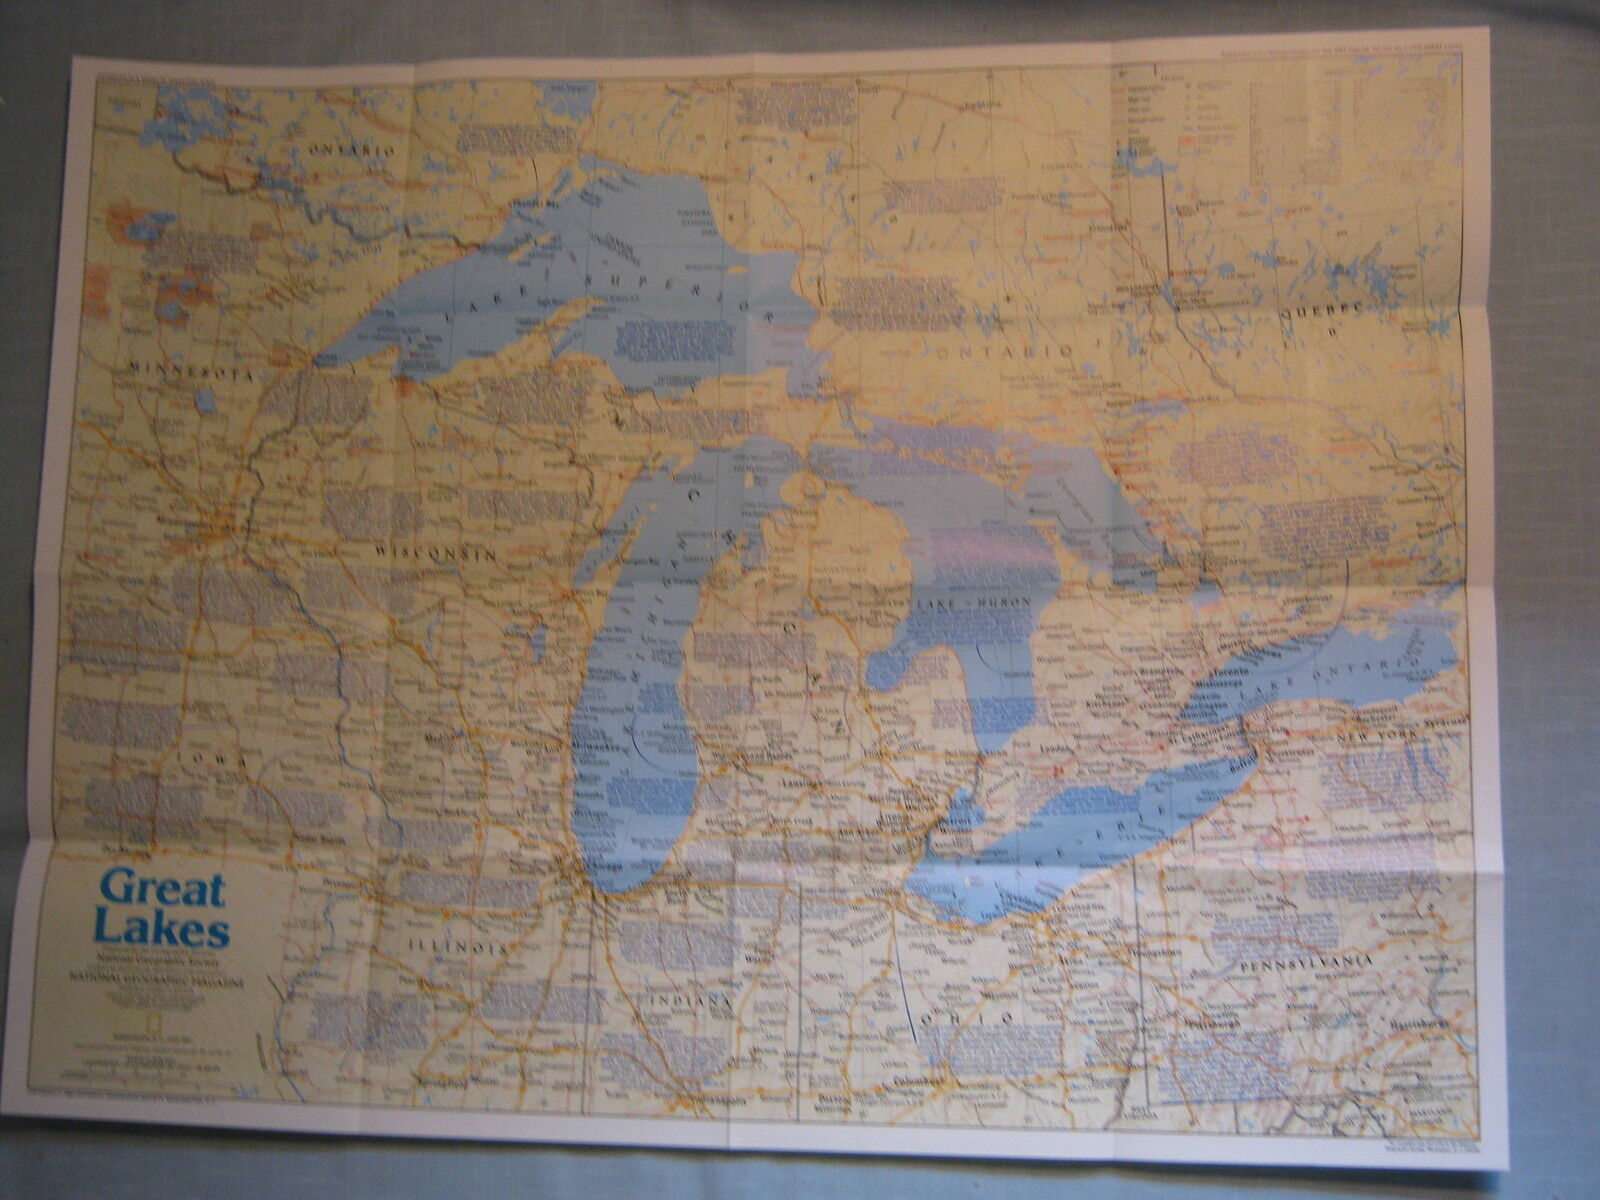 GREAT LAKES MAP + THE MAKING OF AMERICA HISTORY National Geographic July 1987